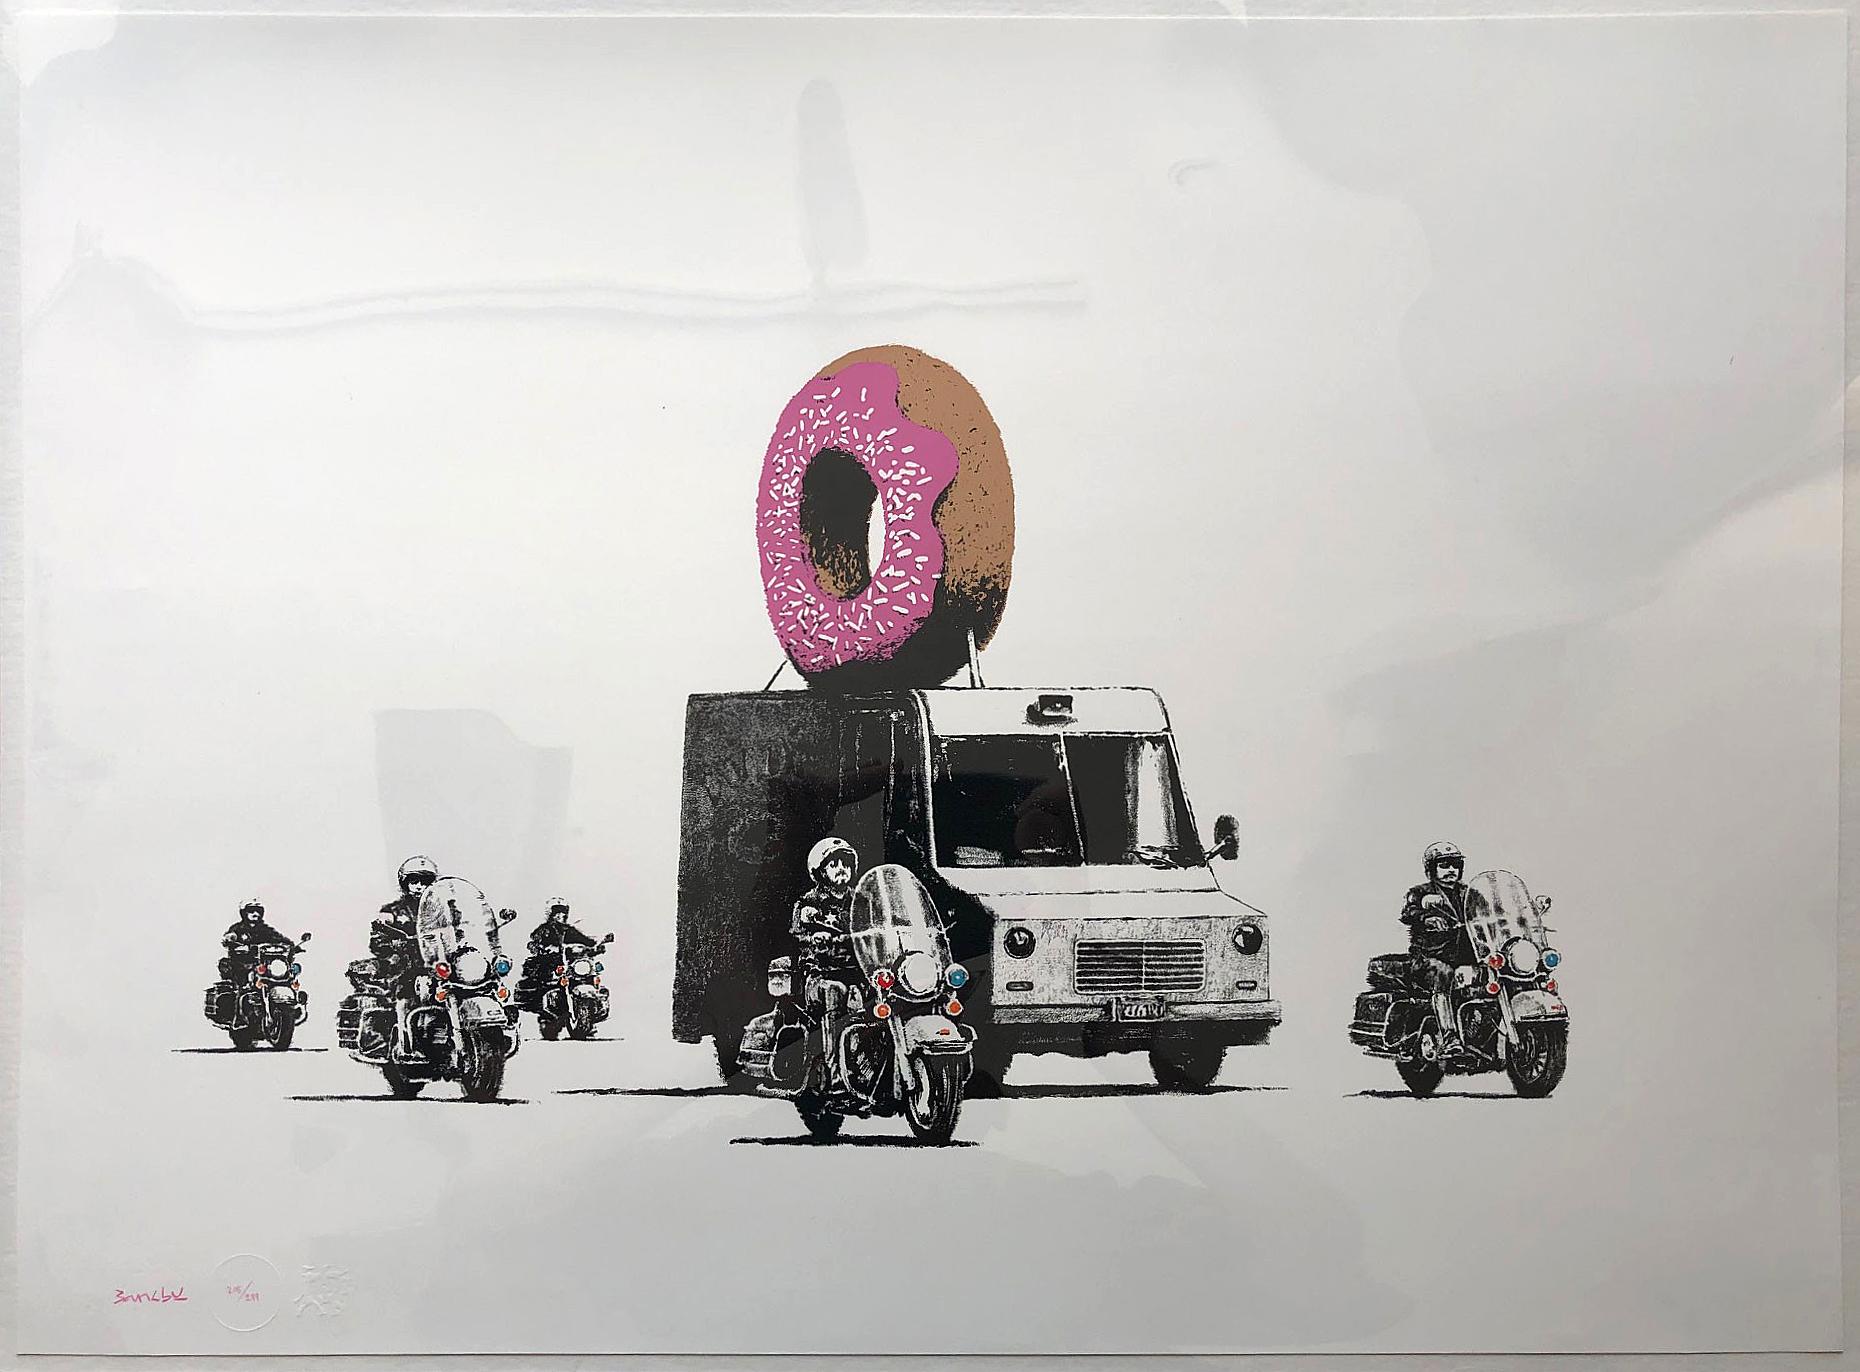 Donuts (Strawberry), 2009 - Print by Banksy